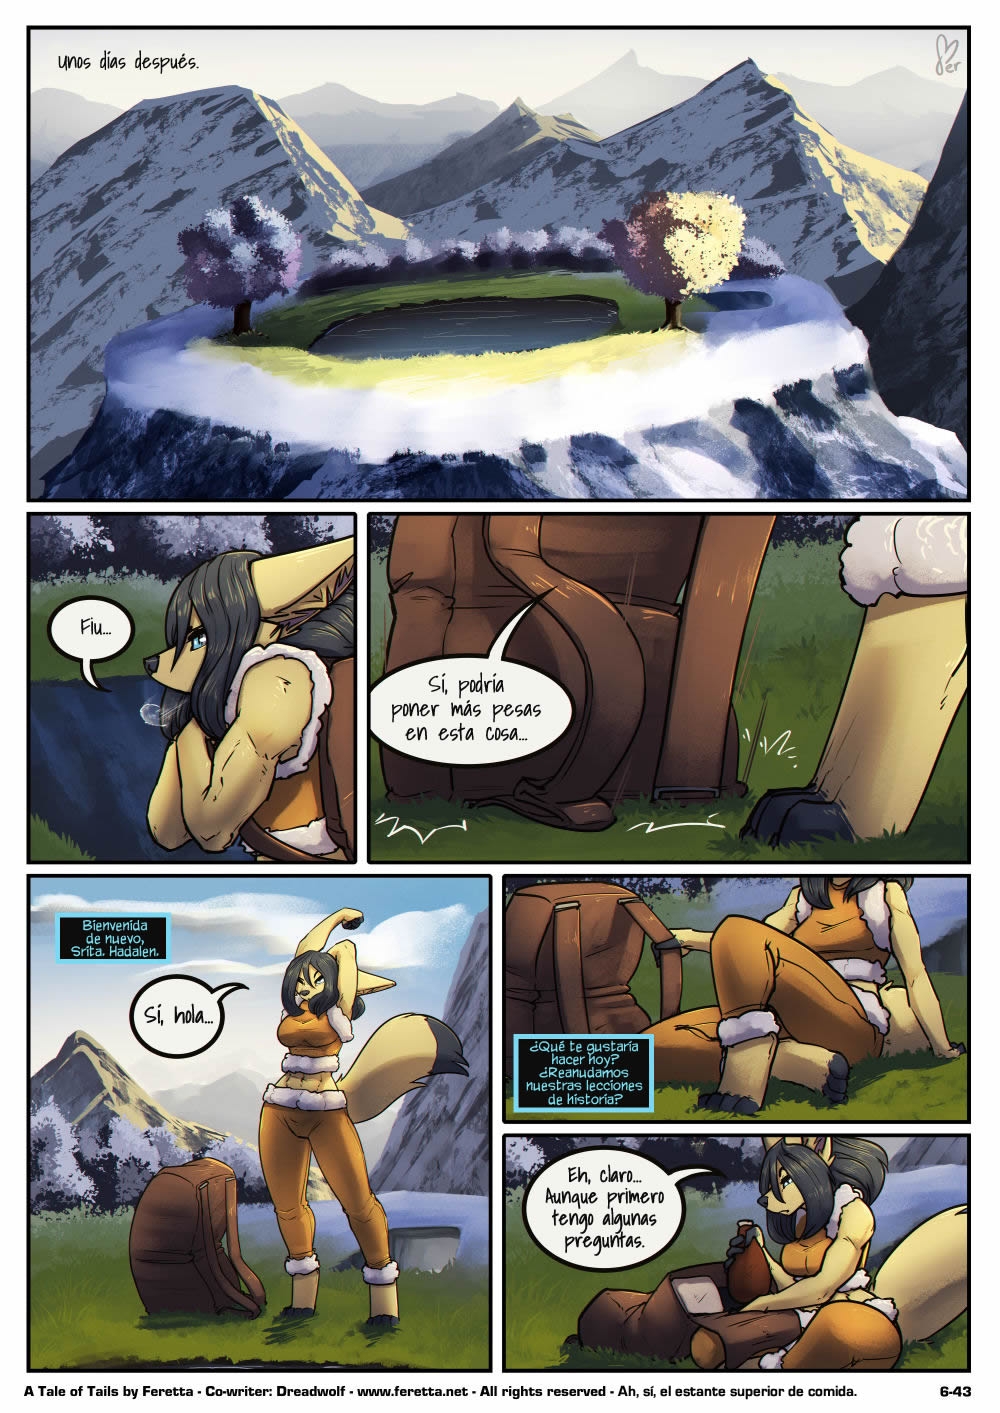 [Feretta] A Tale of Tails: Chapter 6 - Paths converge / Los caminos convergen [Spanish] [Red Fox Makkan] 43